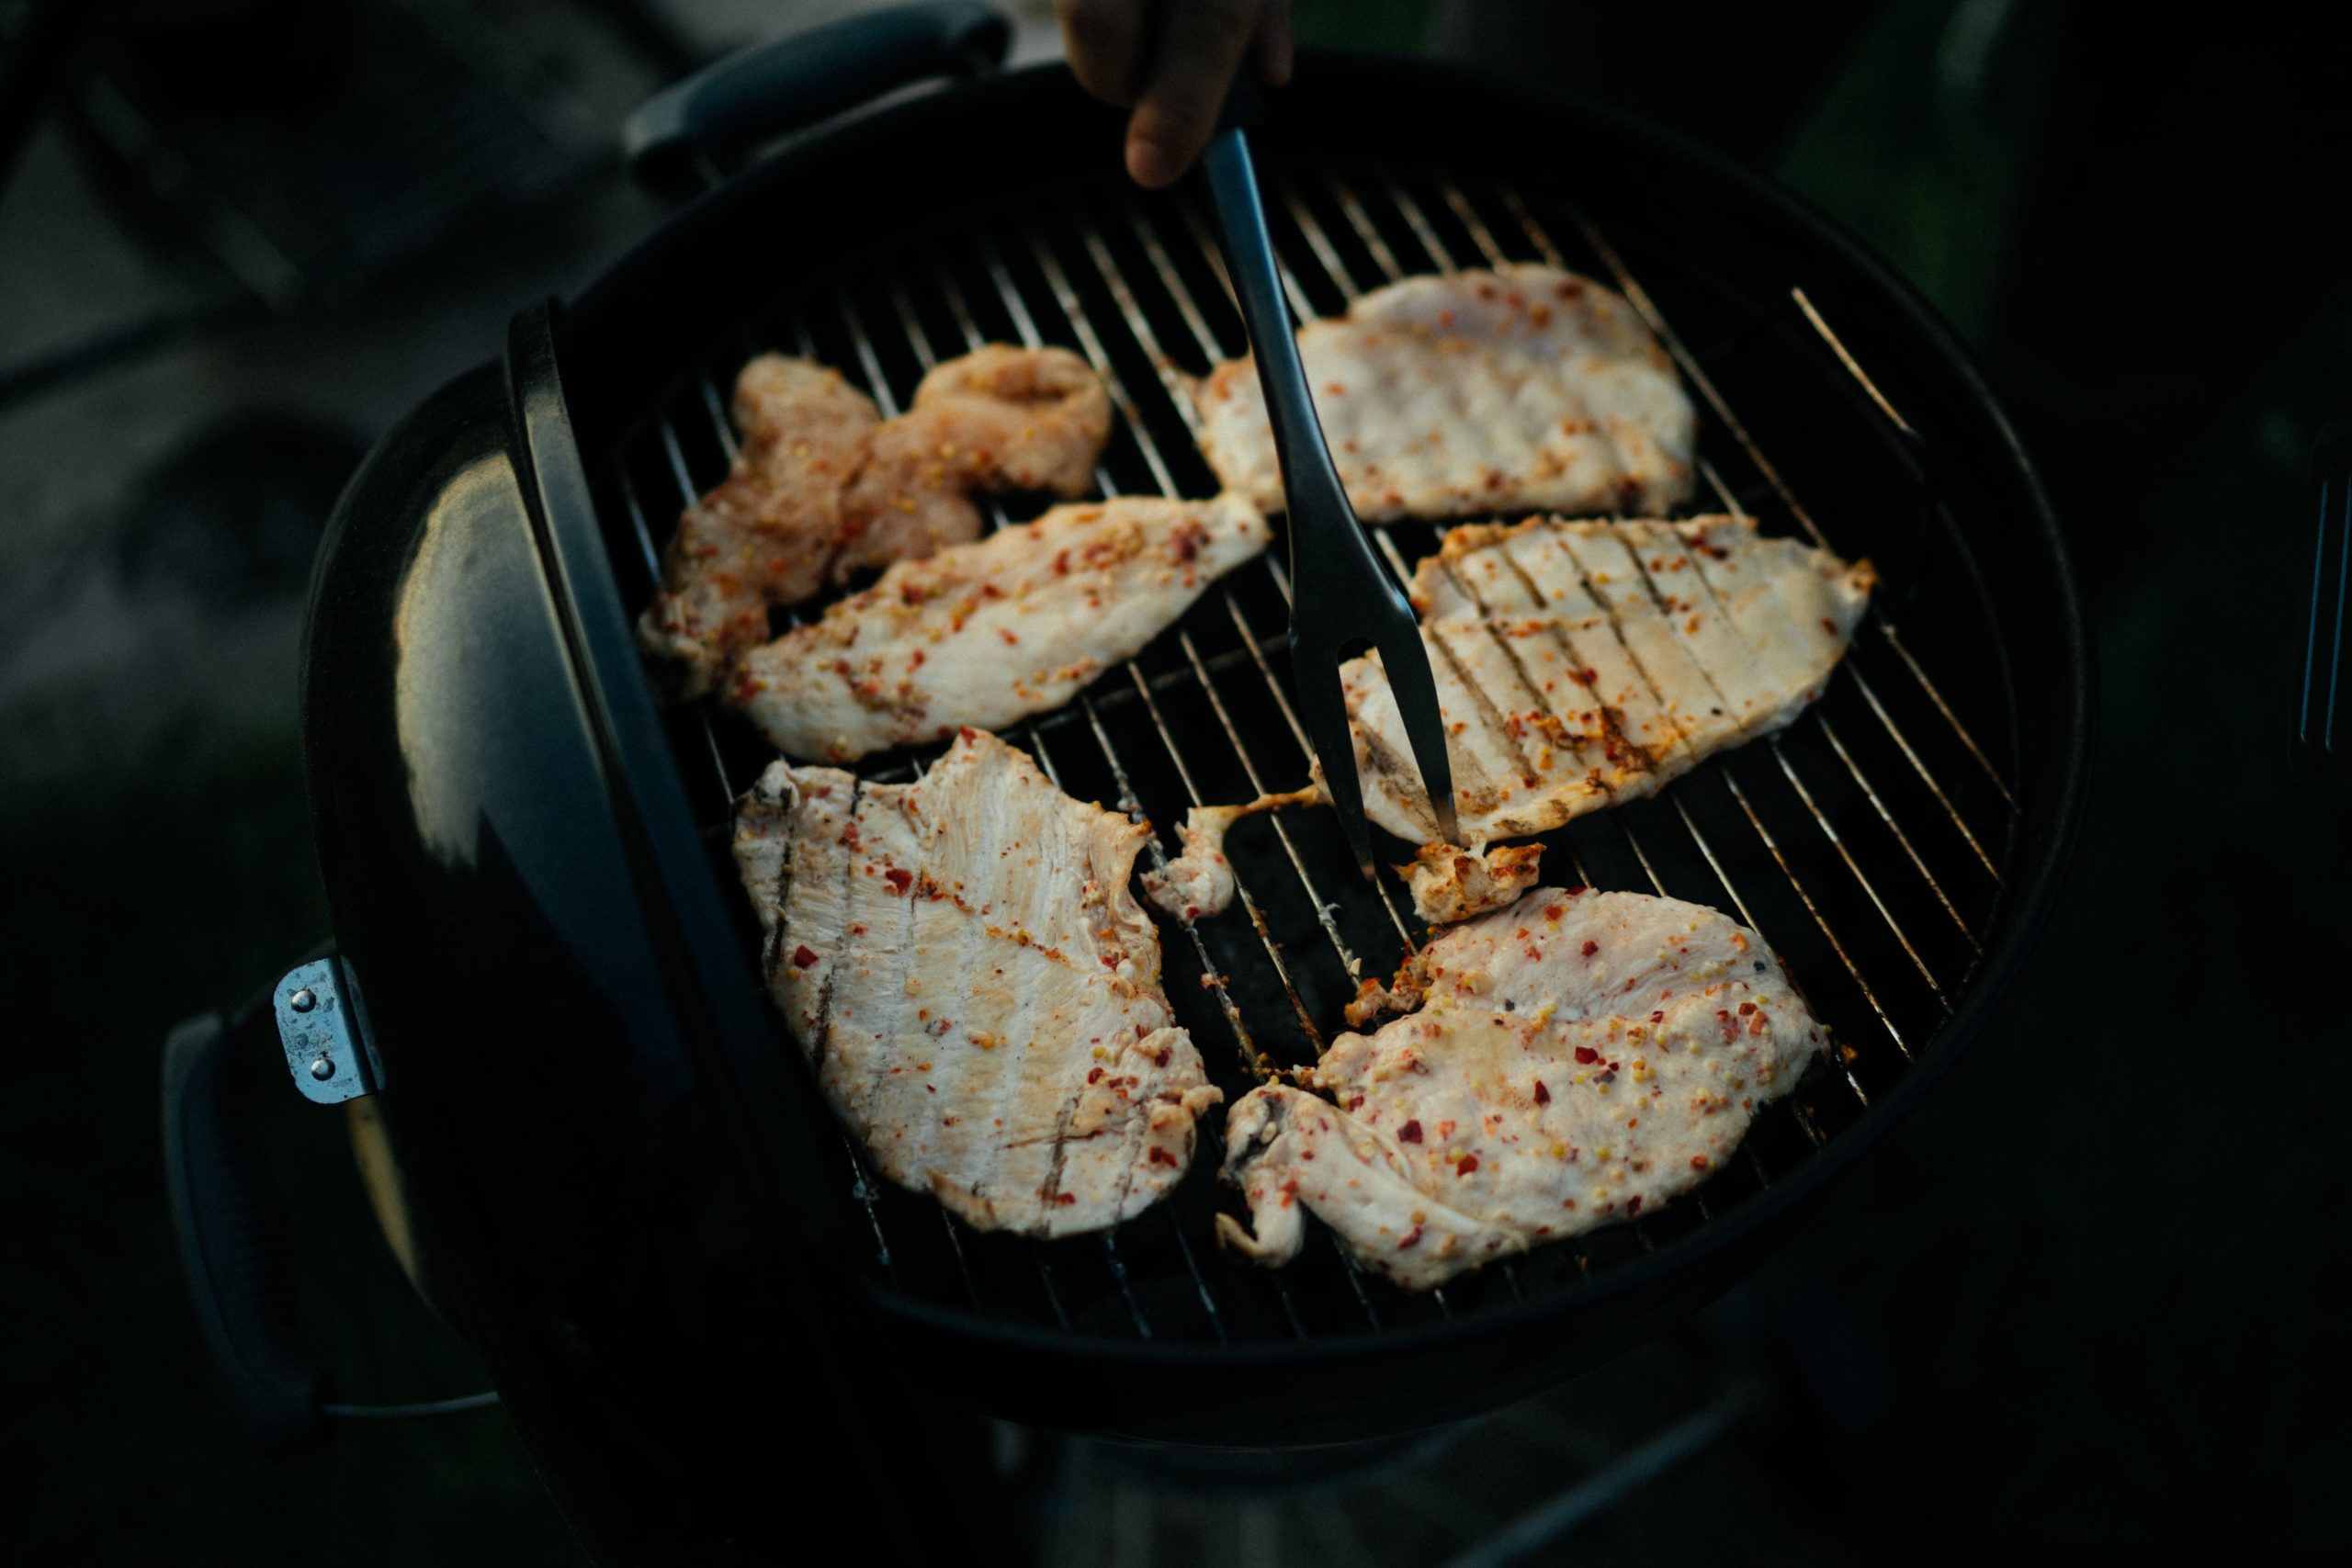 Boneless chicken pieces on the grill